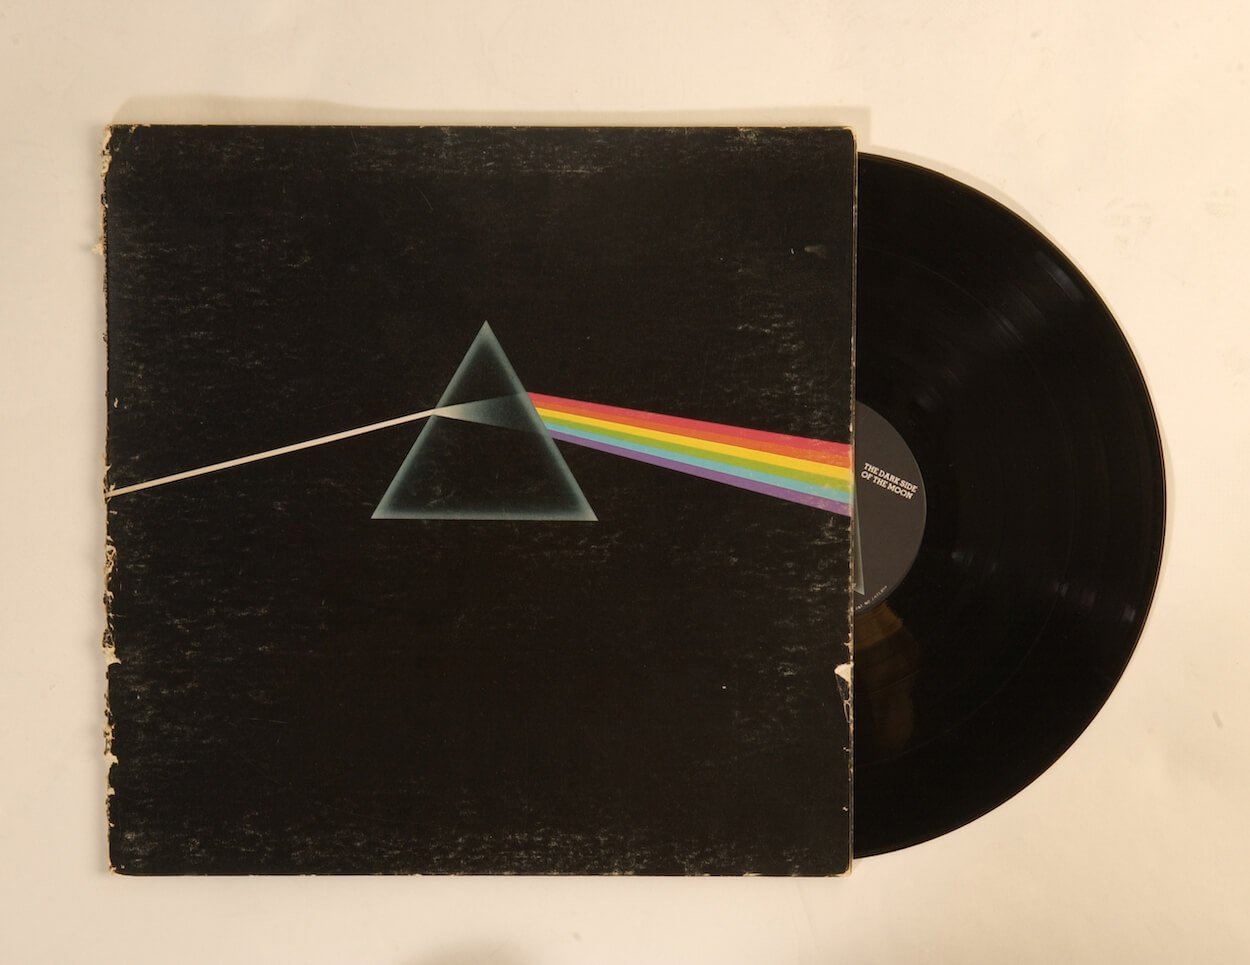 A drawing of a pyramid prism refracting a white beam of light into a rainbow on the album cover for Pink Floyd's 'The Dark Side of the Moon.'